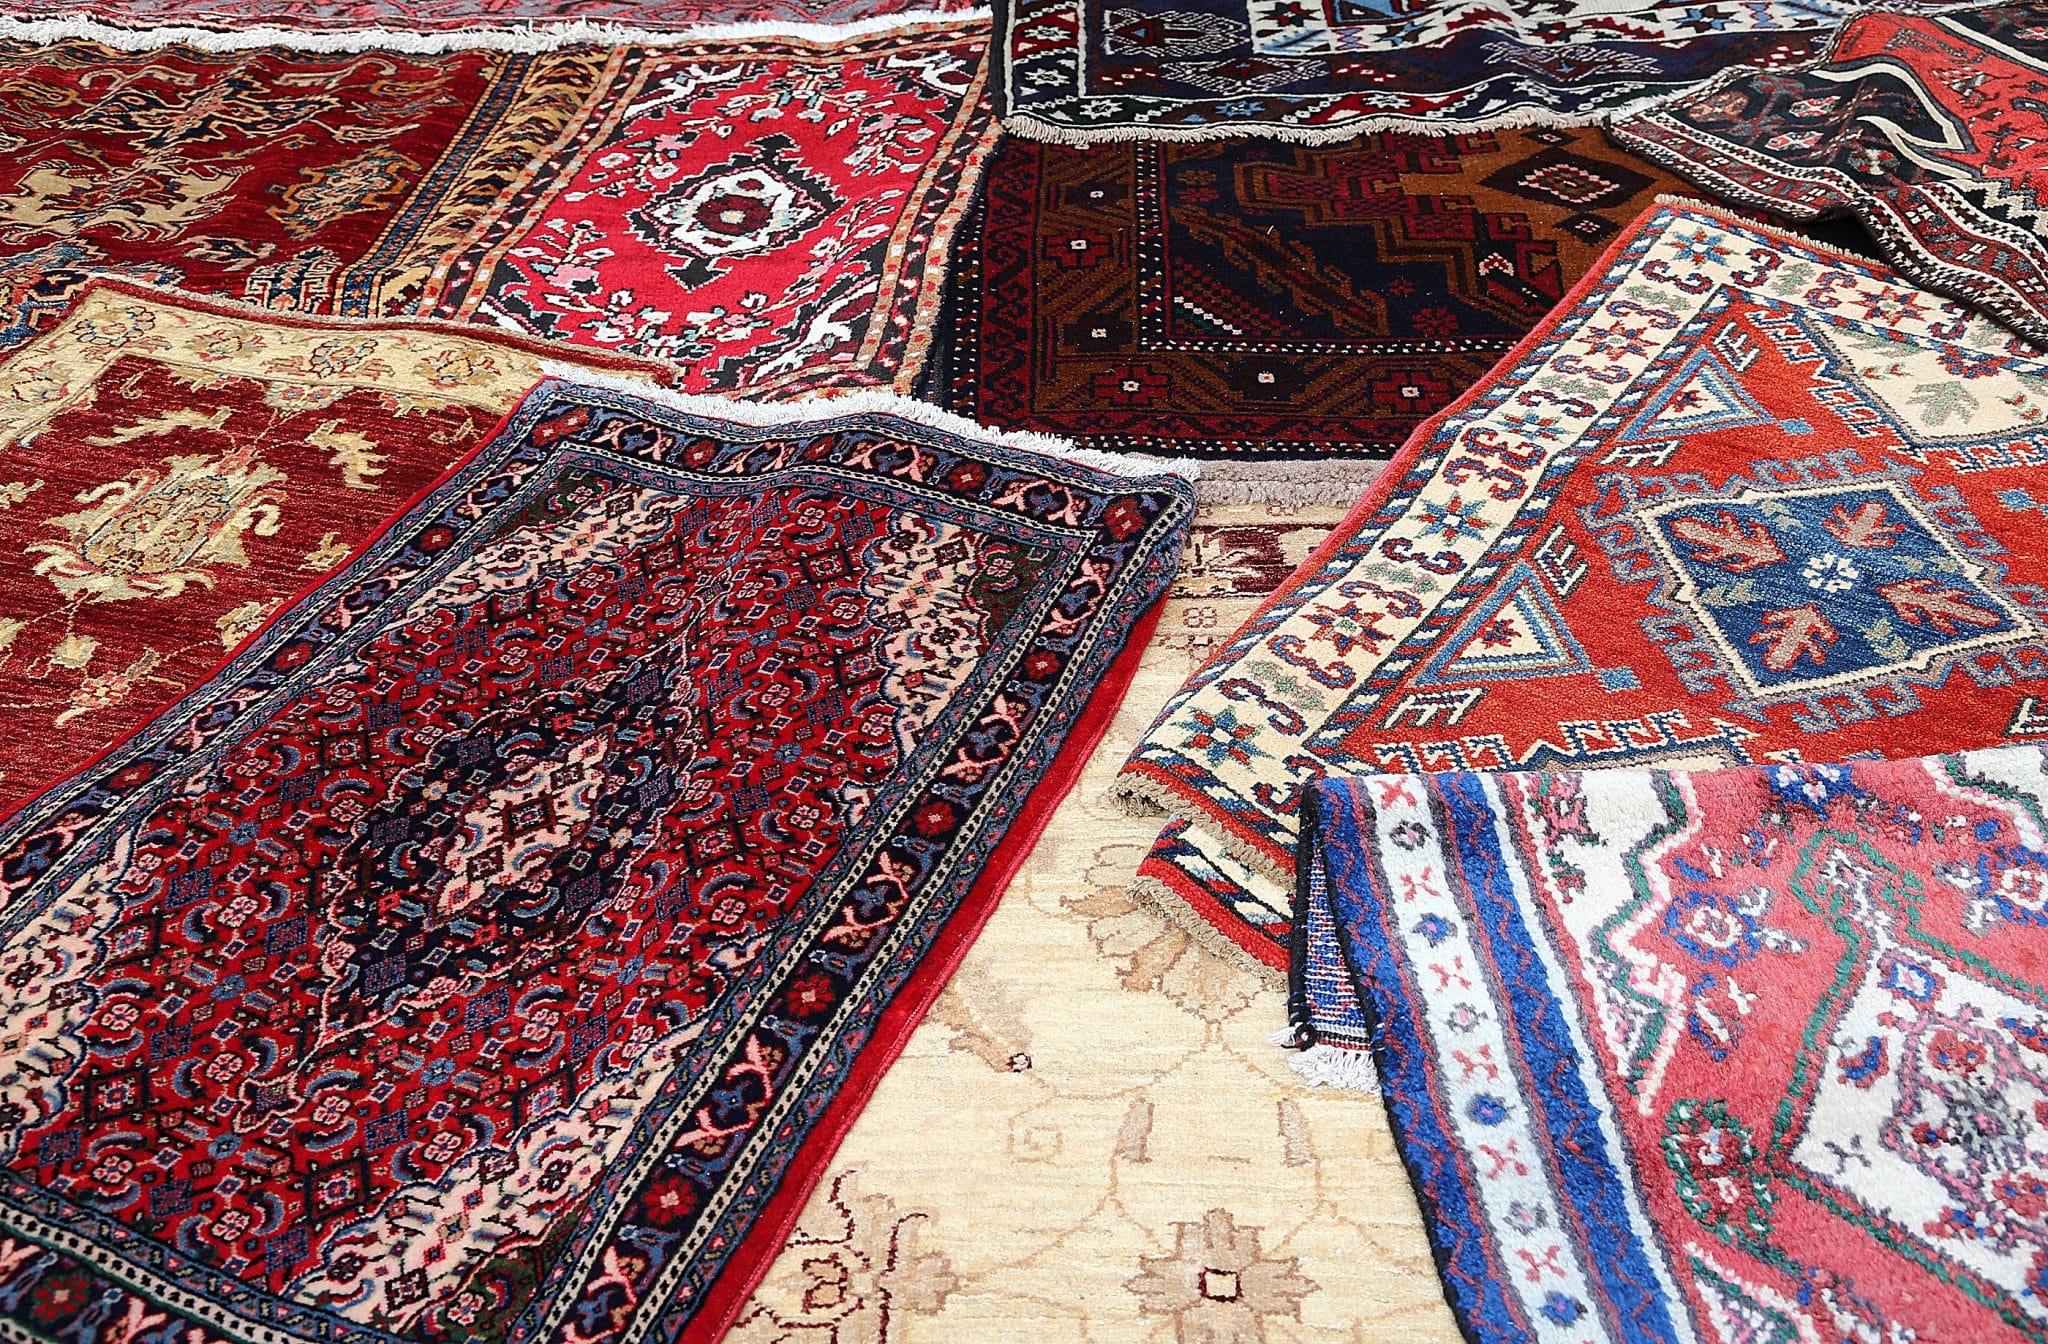 How Can I Prevent Colour Fading in My Oriental Rug?